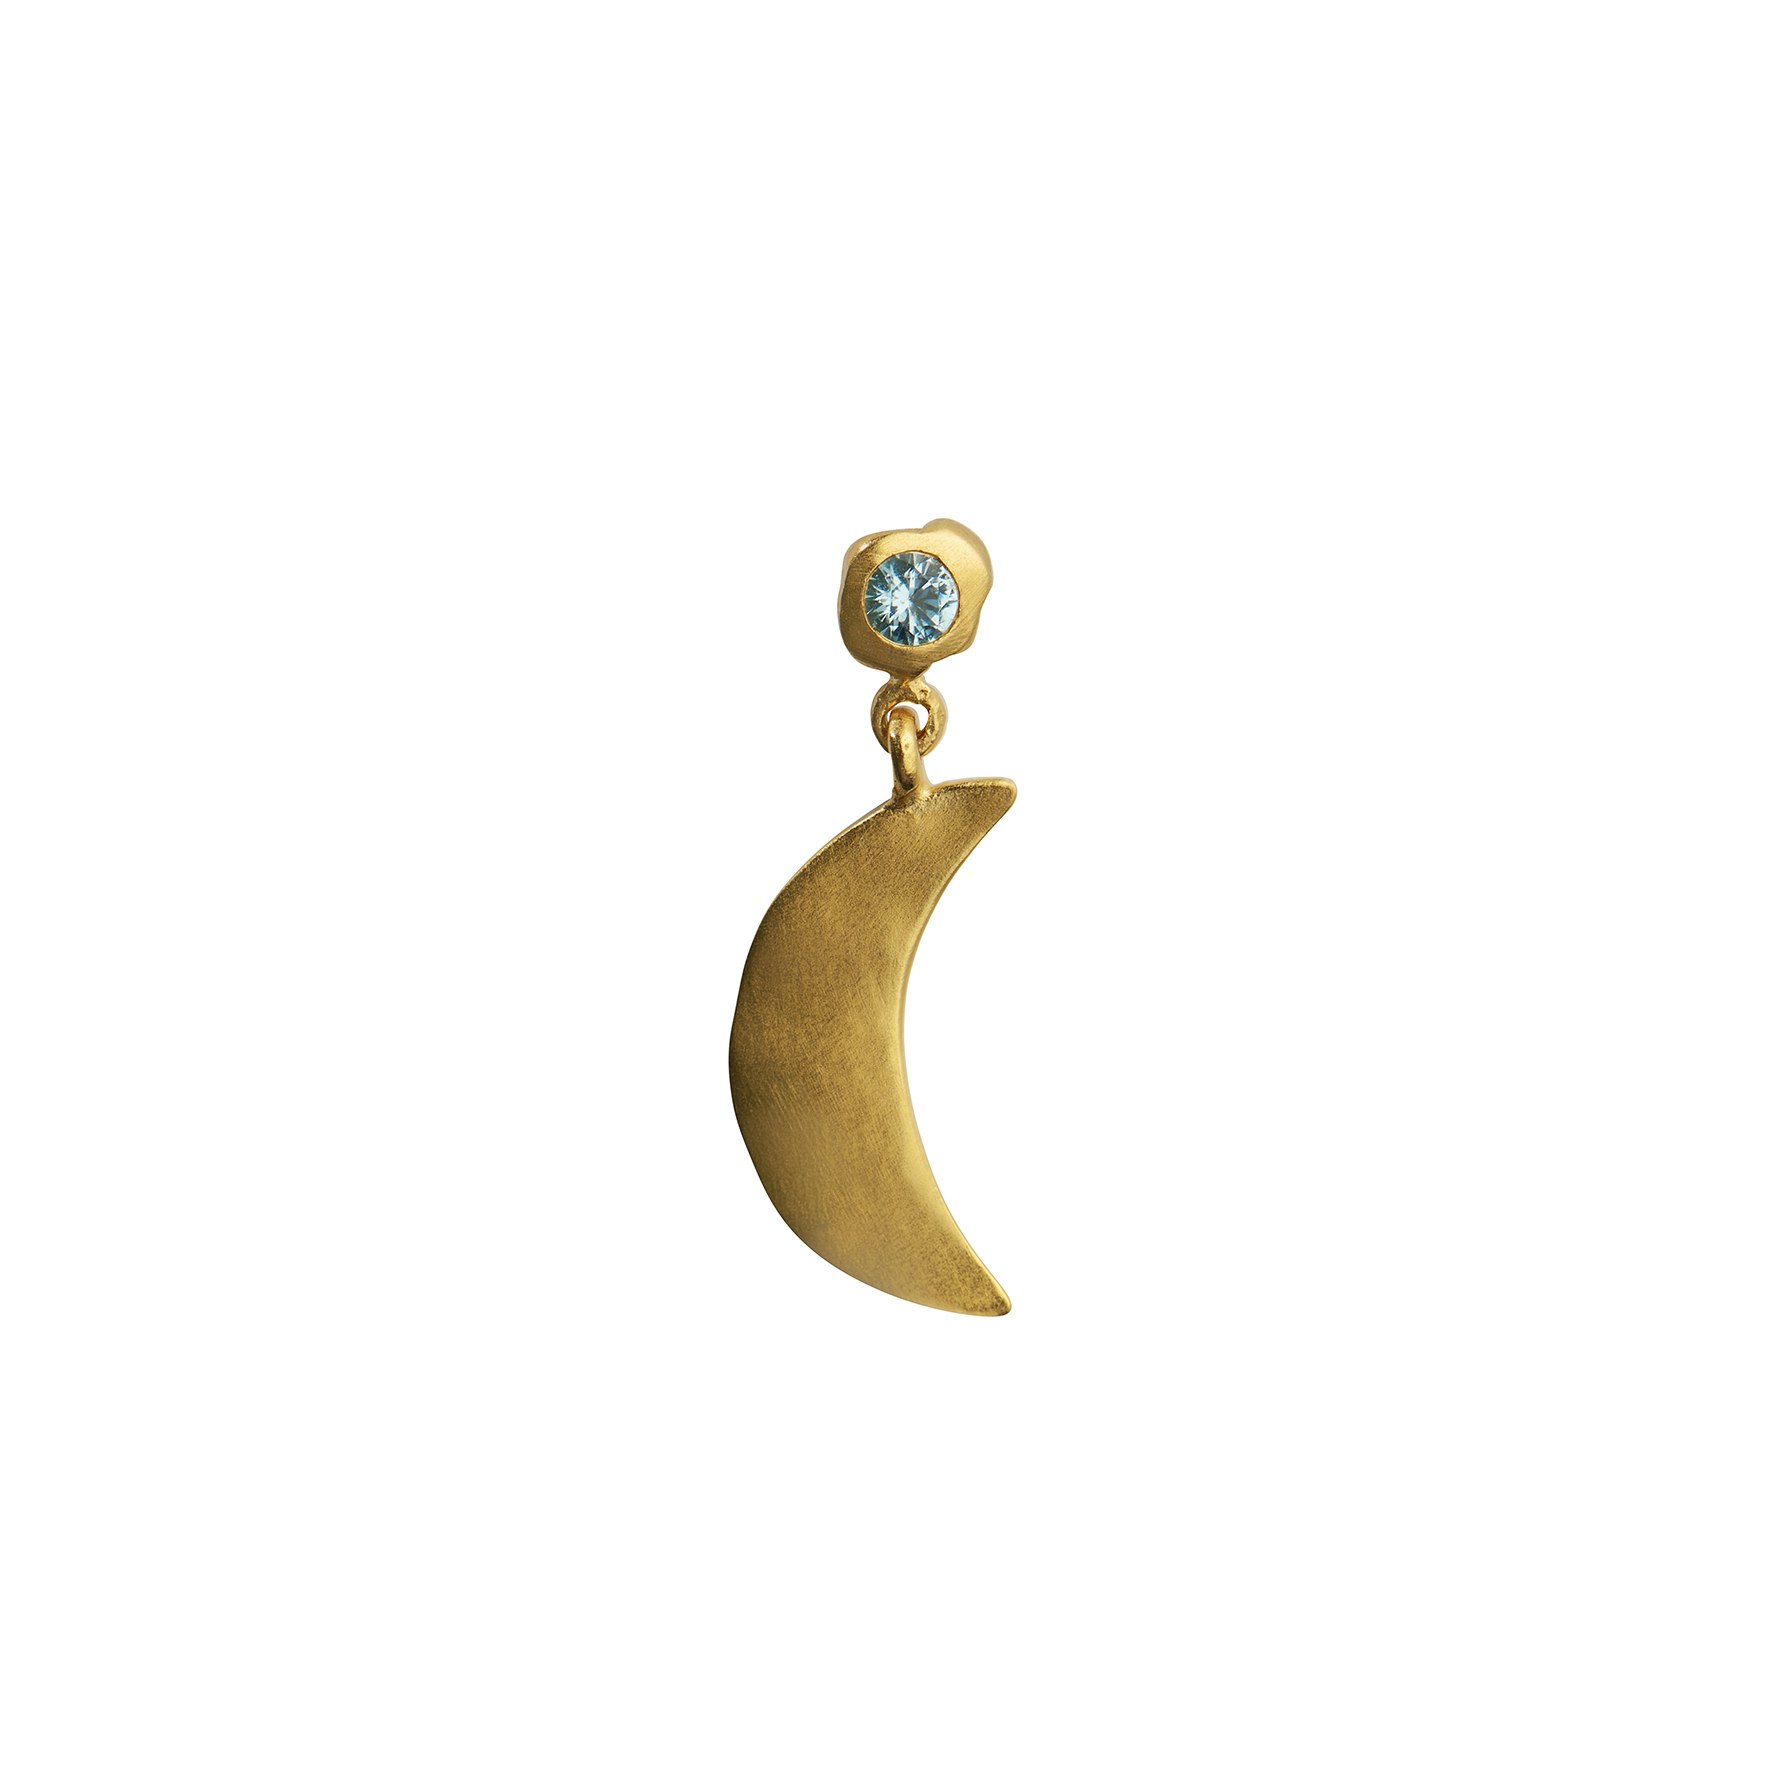 Big Dot Bella Moon with Blue Lagune Stone from STINE A Jewelry in Goldplated Silver Sterling 925